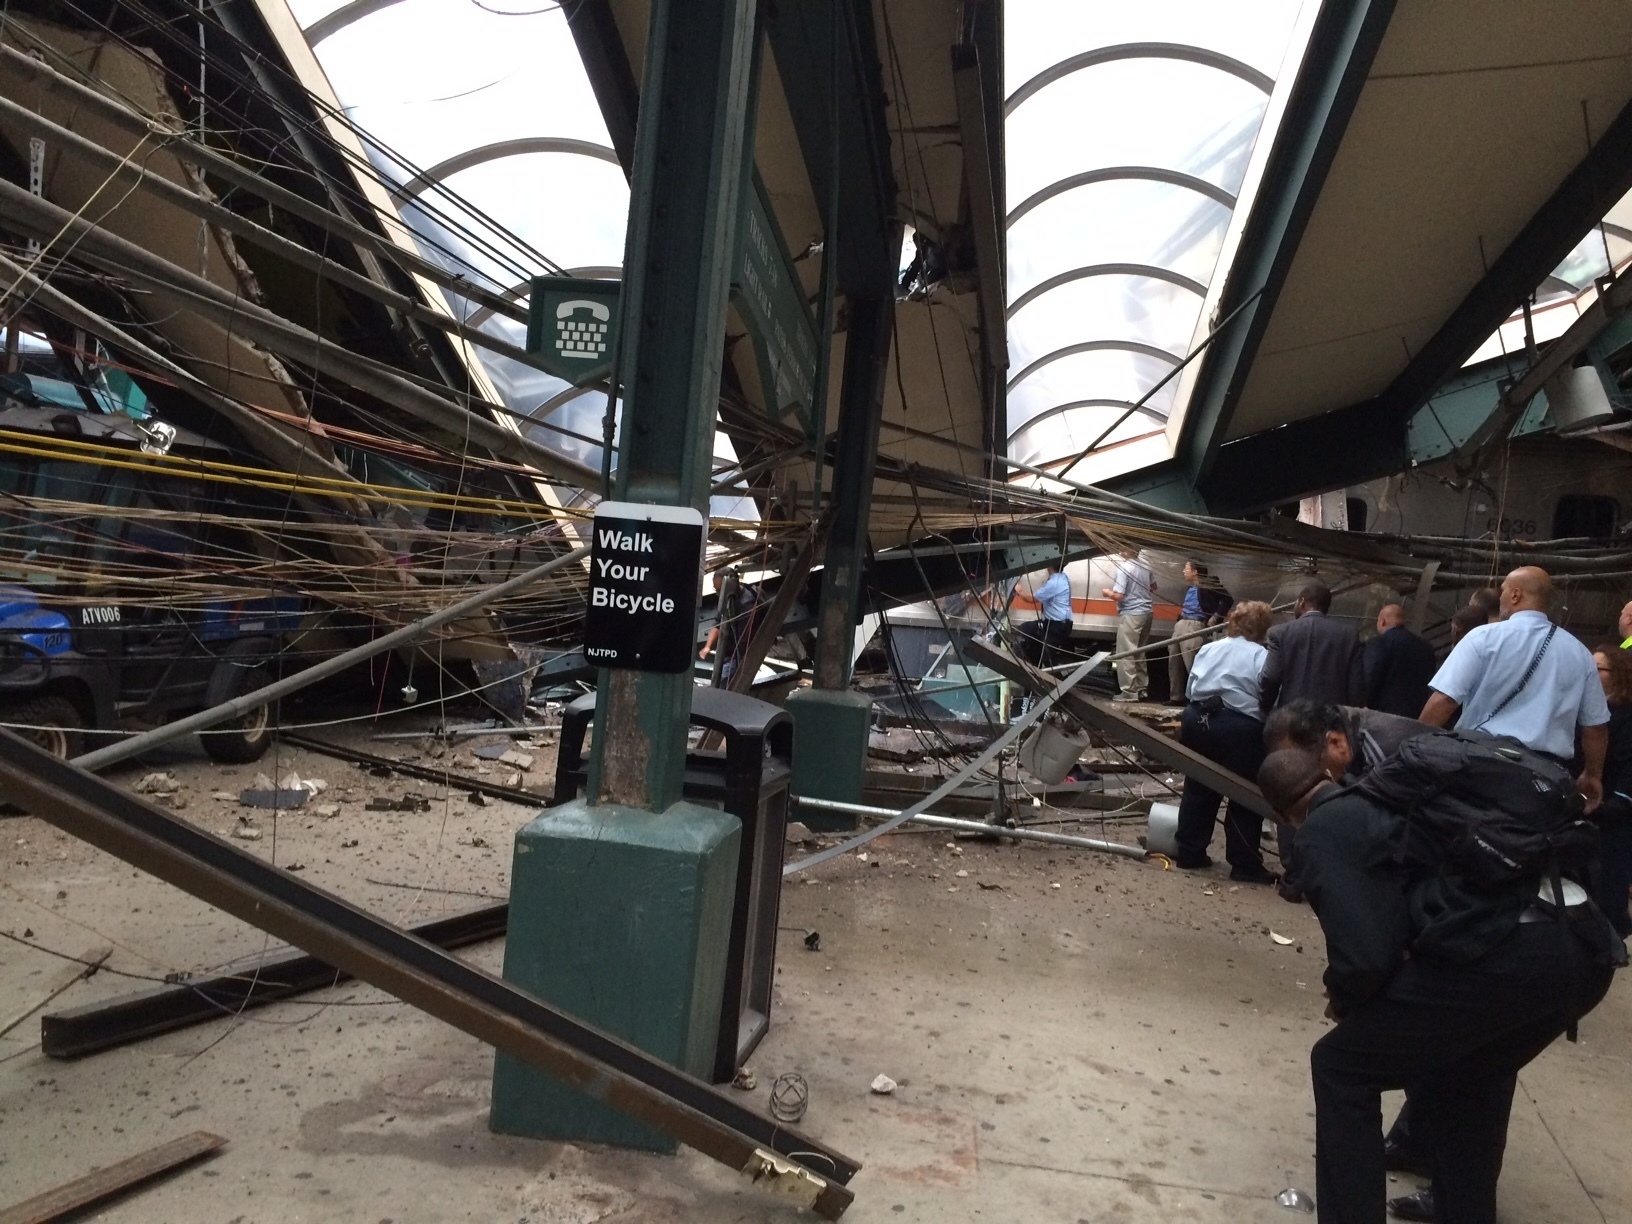 In a photo provided by William Sun, structural damage is seen at the train station in Hoboken, N.J., after a New Jersey Transit commuter train crashed into the station during the morning rush hour, Thursday, Sept. 29, 2016. The crash caused an unknown number of injuries and witnesses reported seeing one woman trapped under concrete and many people bleeding.